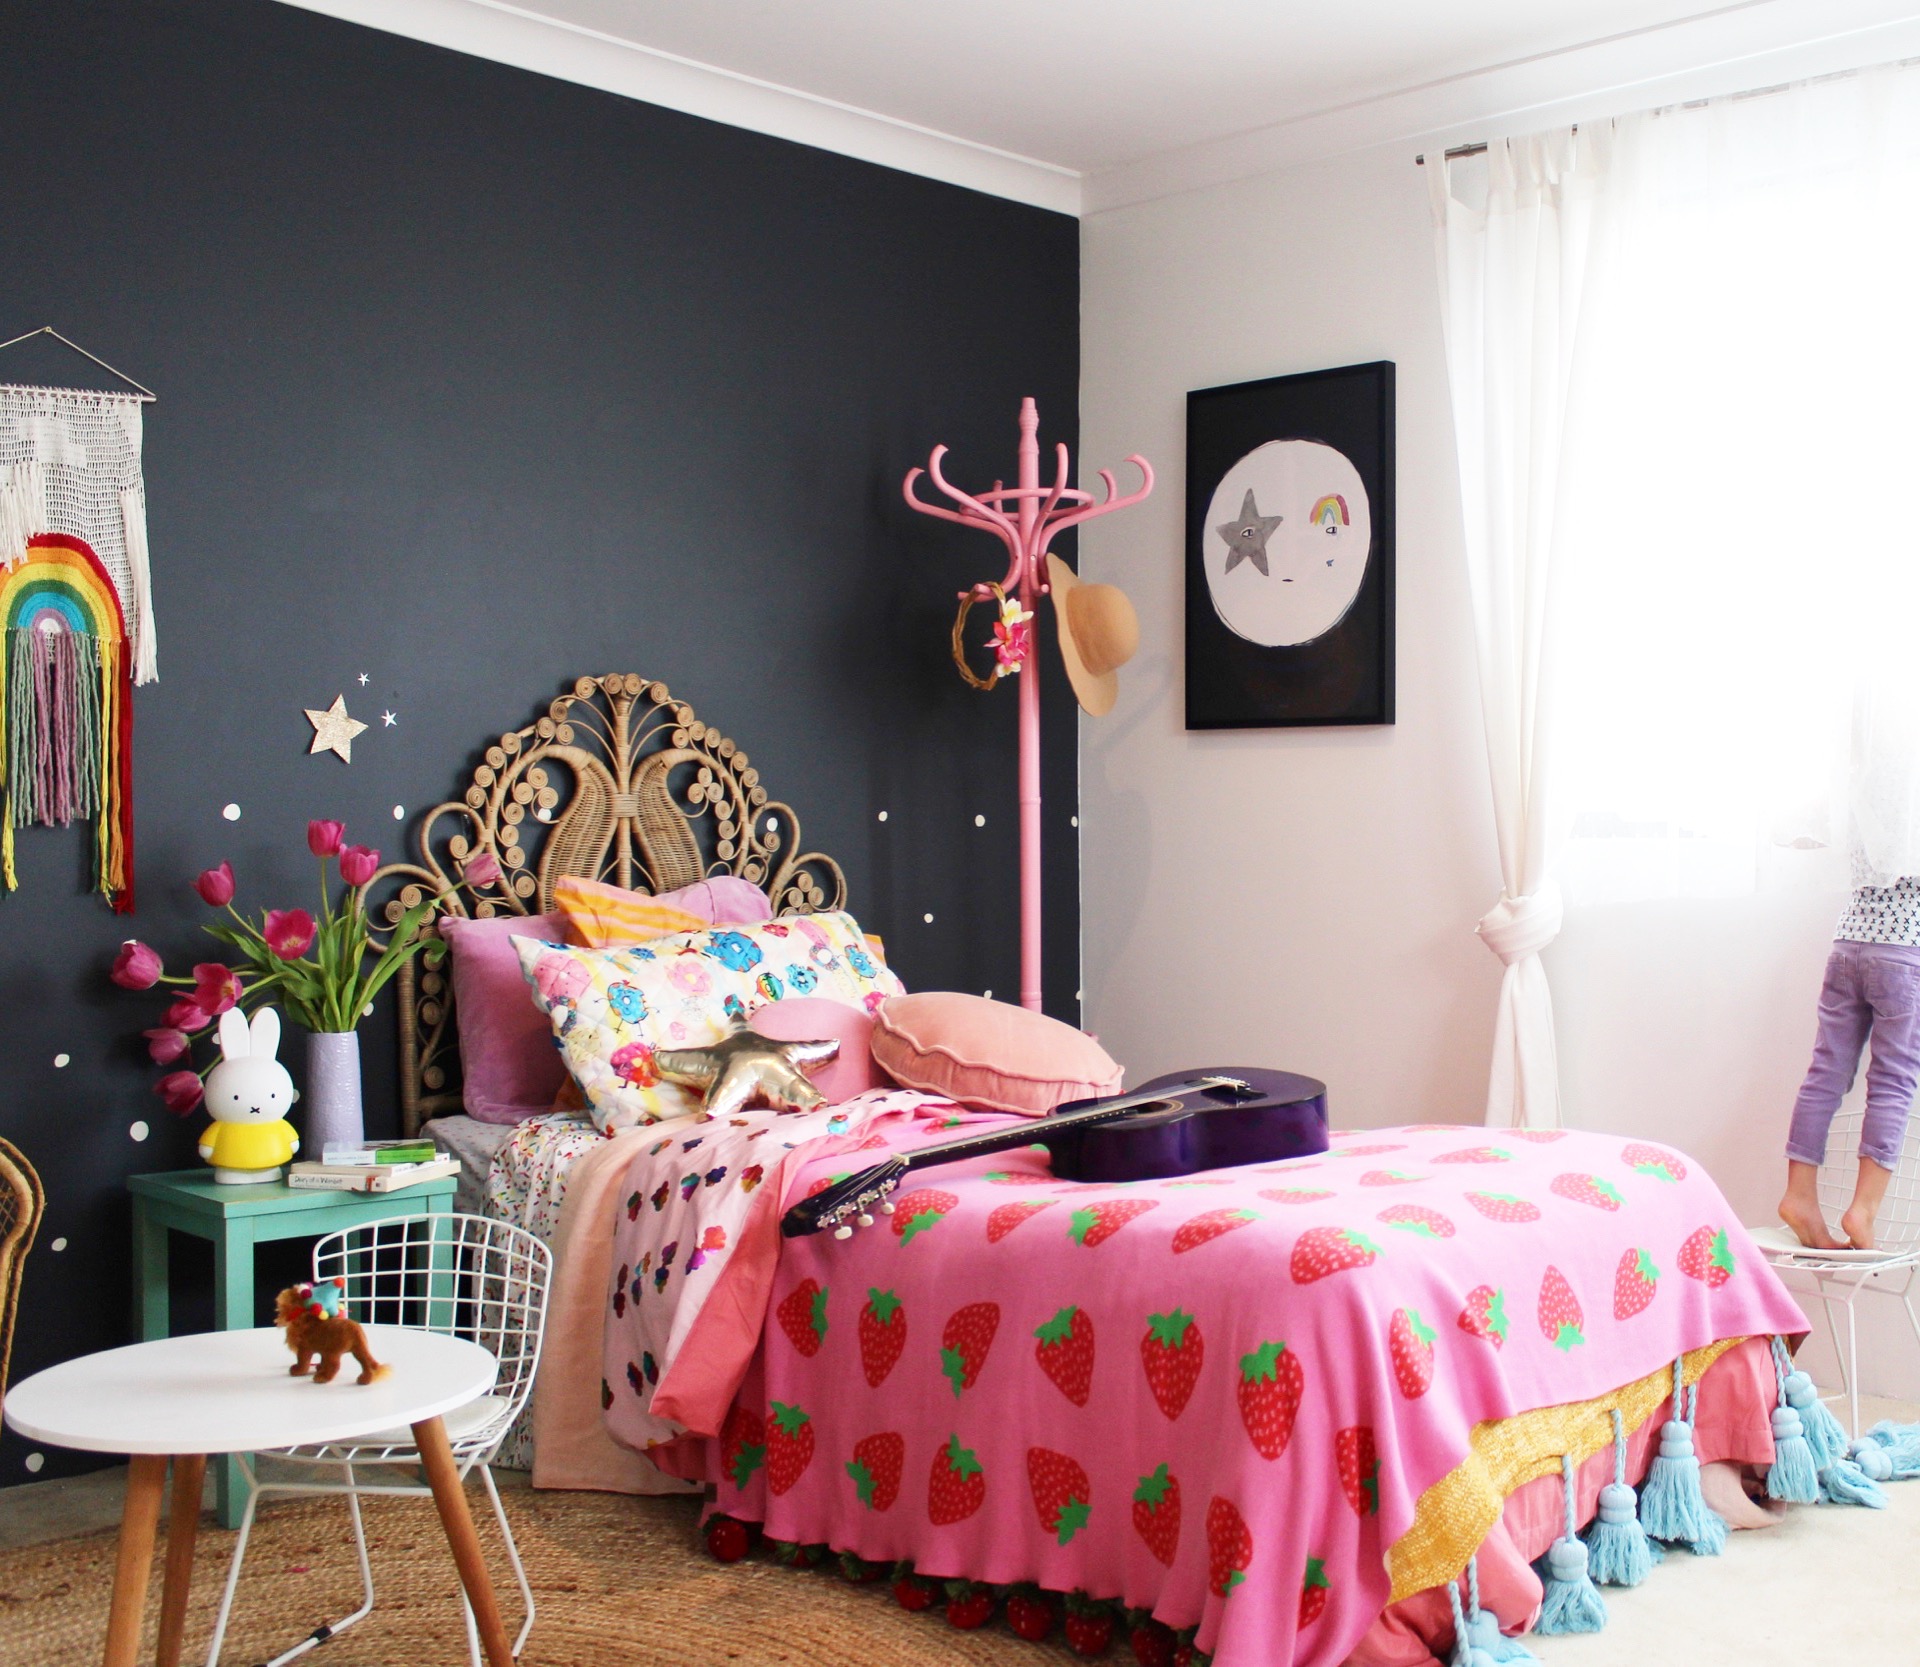 Girls' bedroom ideas – 20 looks to please every child | Real Homes